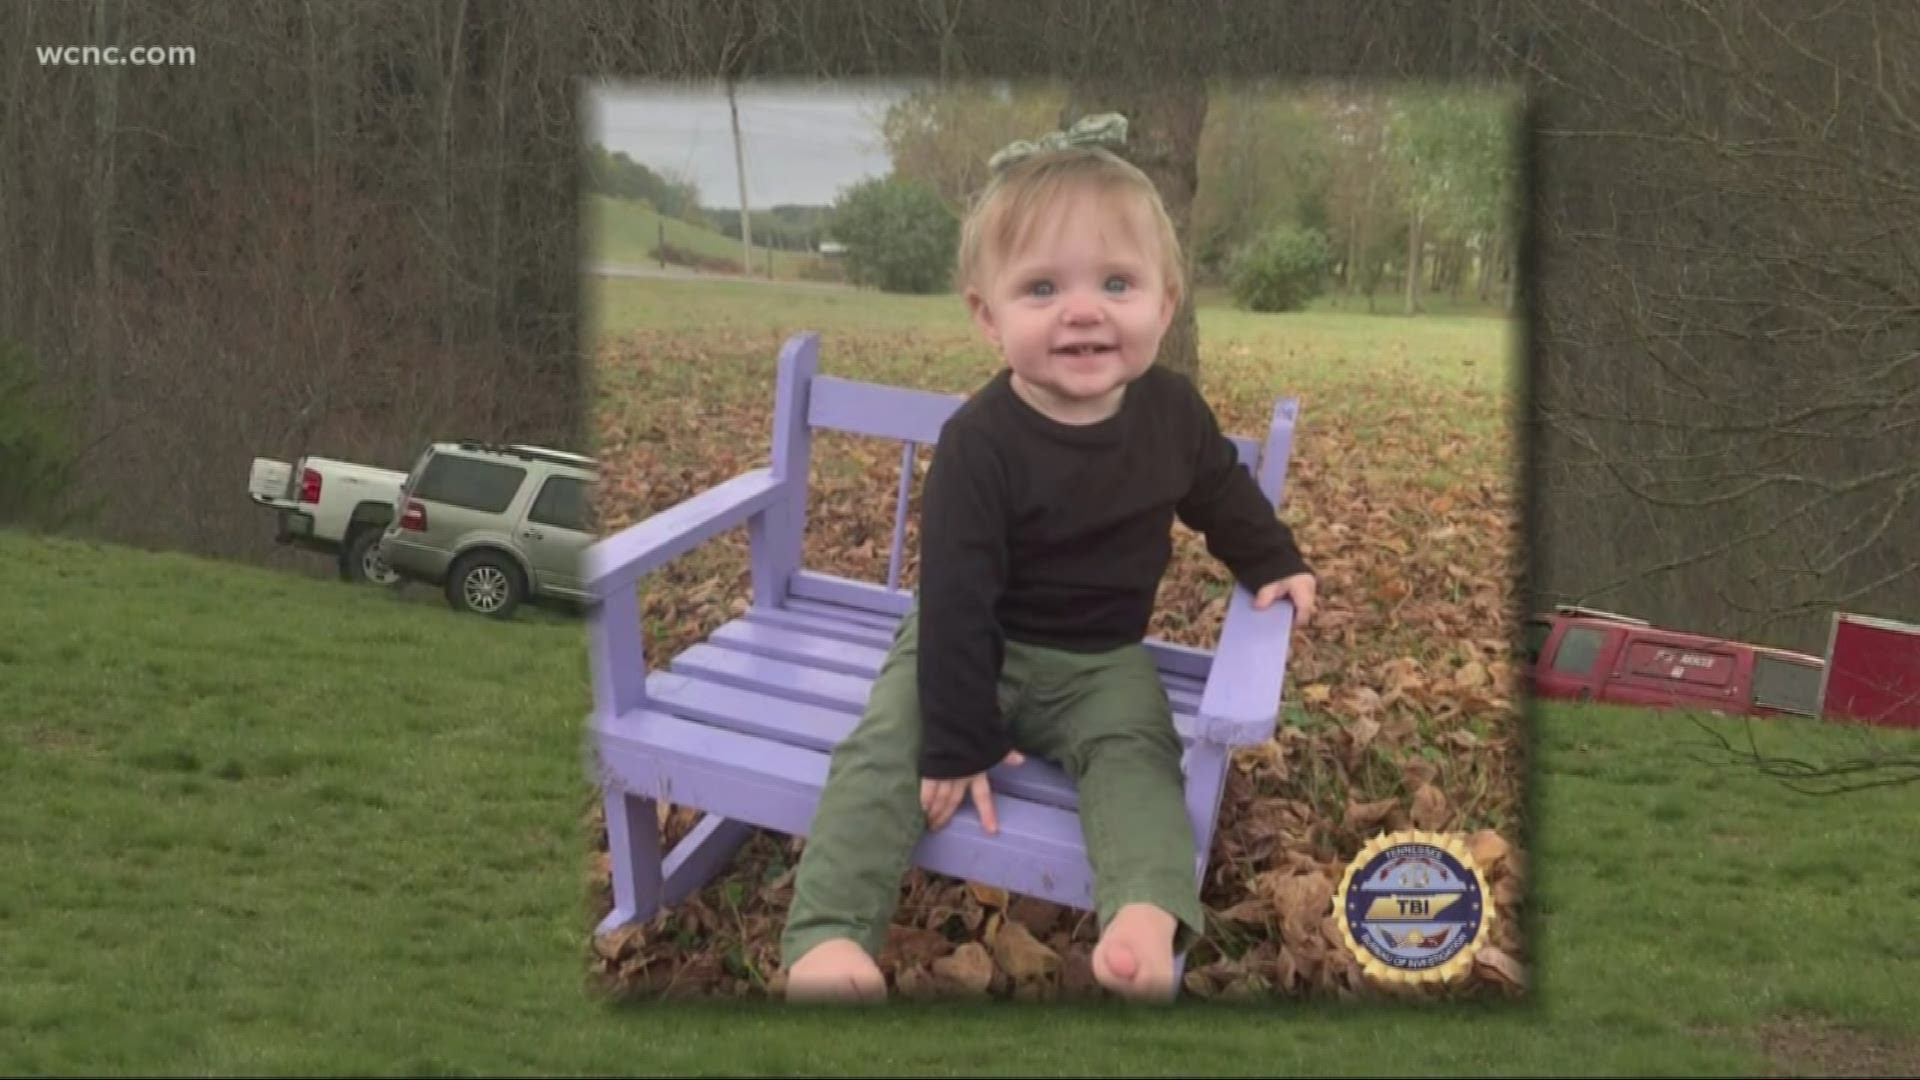 Officials say 15-month-old Evelyn Boswell was officially reported missing last week. But we've learned the little girl has not been seen since December.